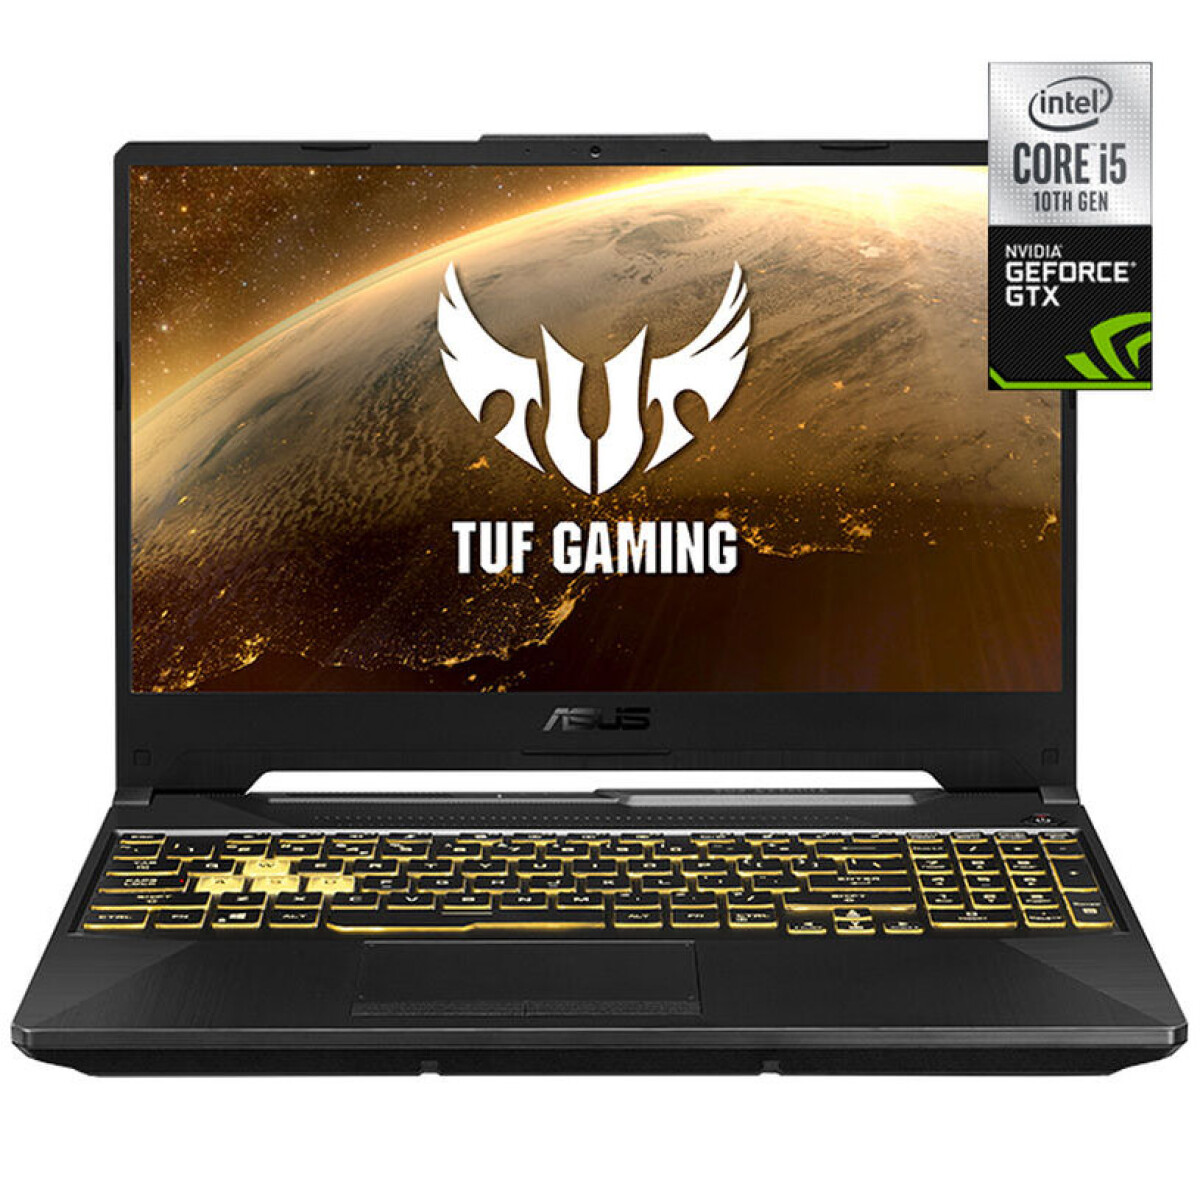 Notebook Gamer Asus Core I5 512GB Ssd 8GB W11 - 001 